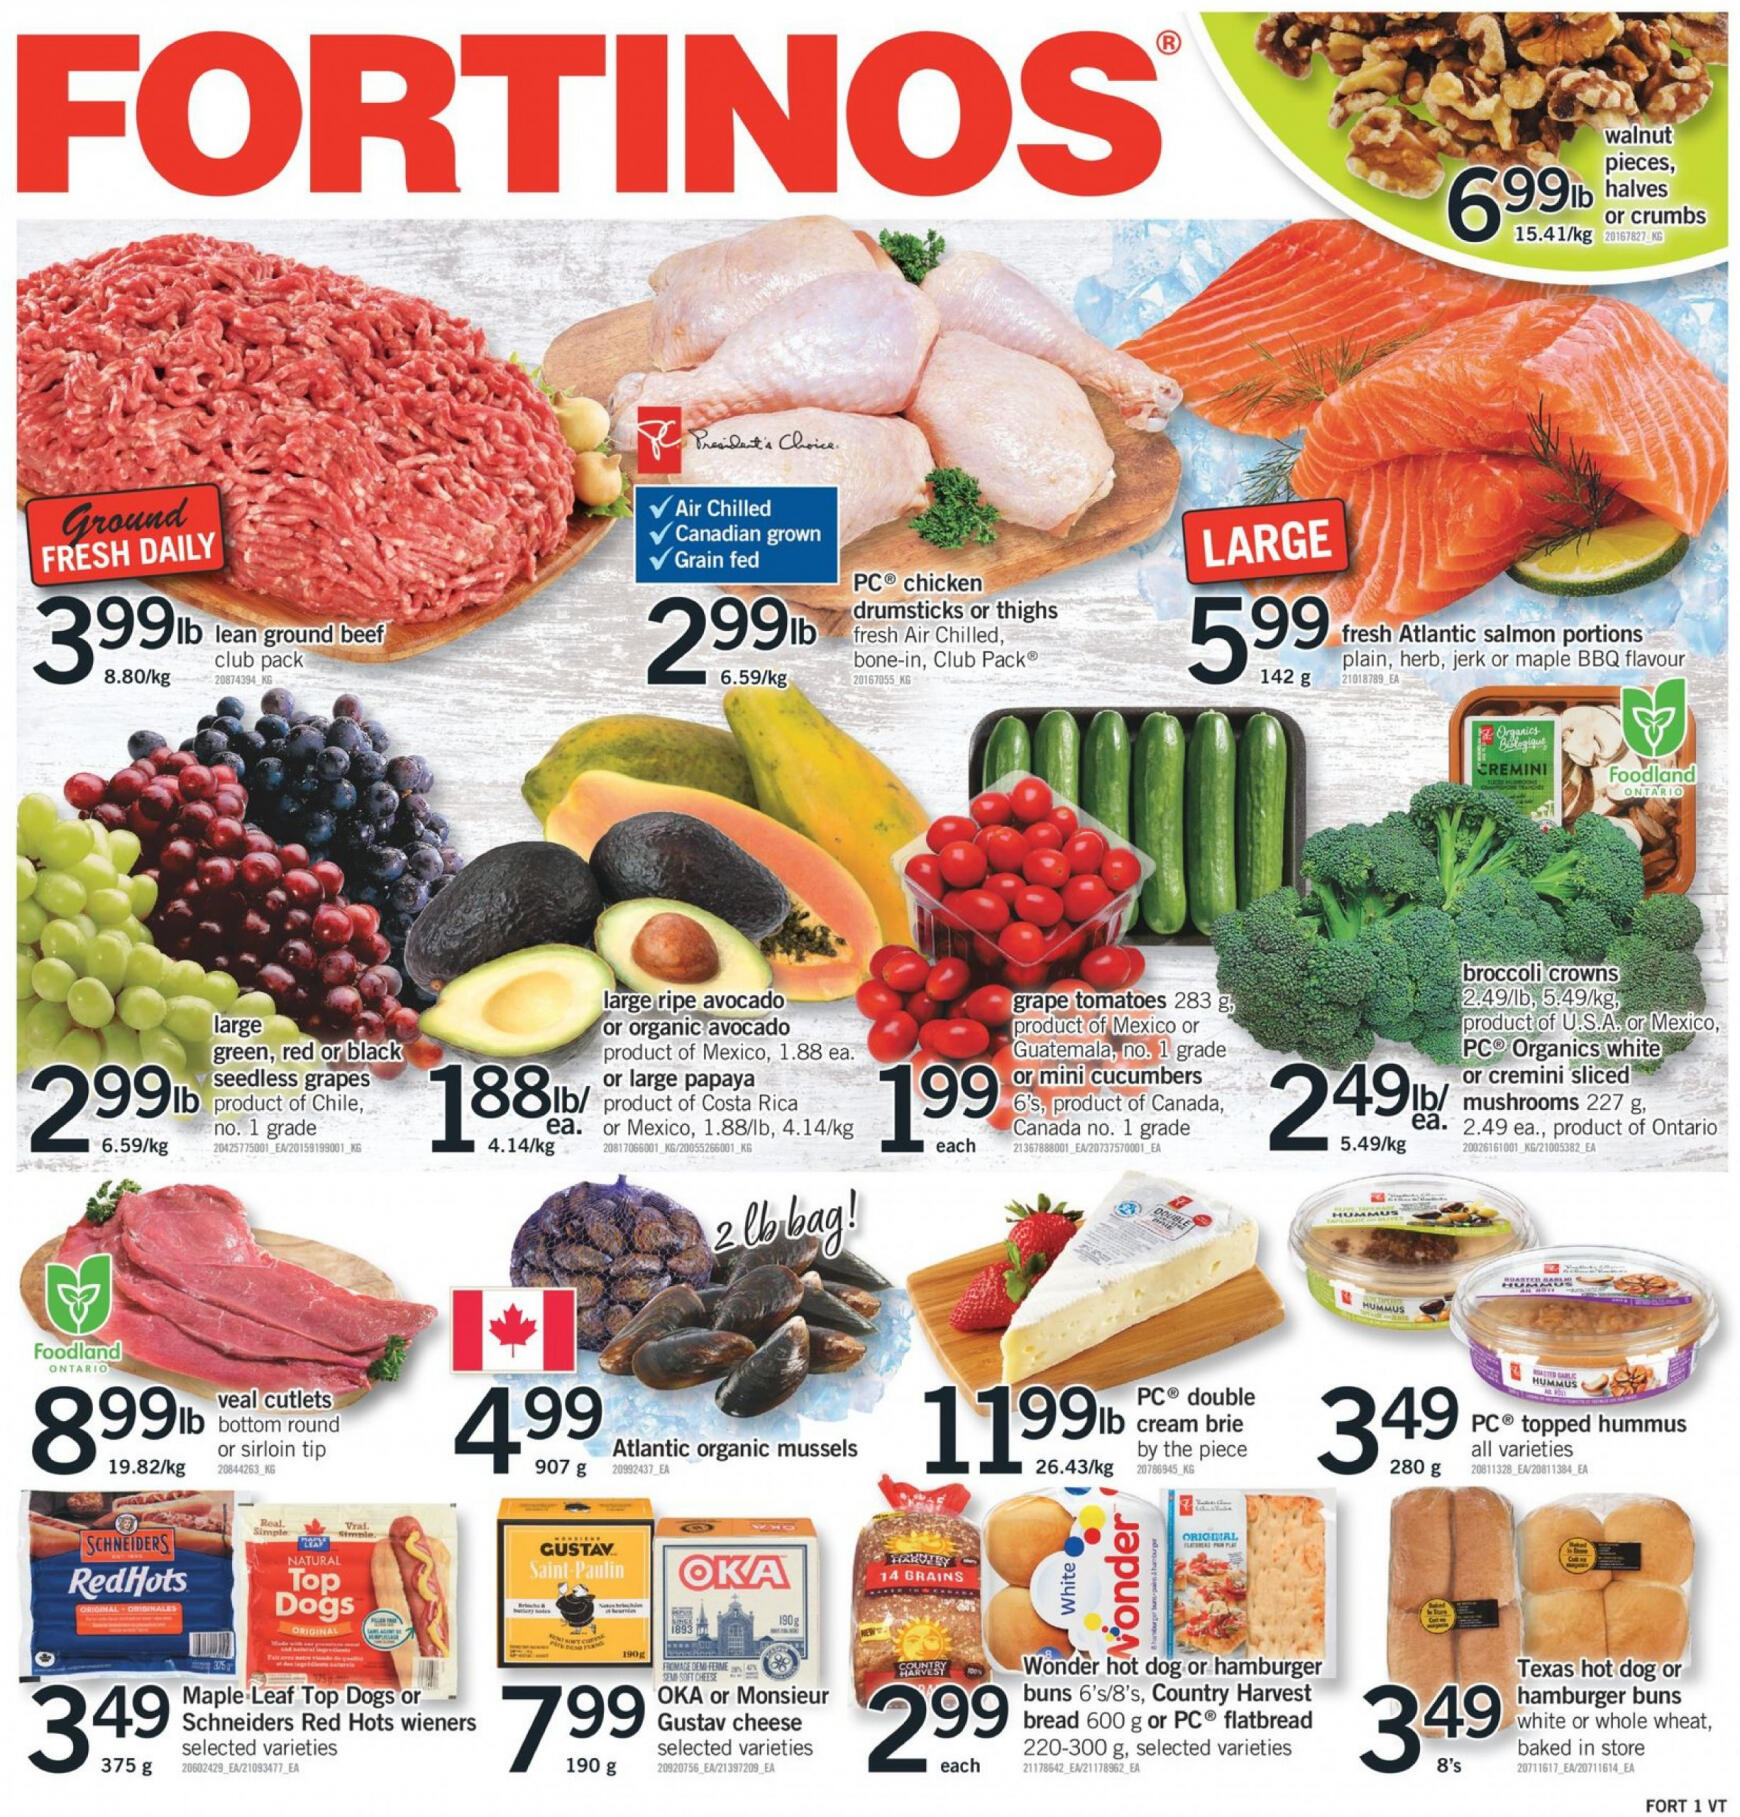 fortinos - Fortinos flyer current 02.05. - 08.05.